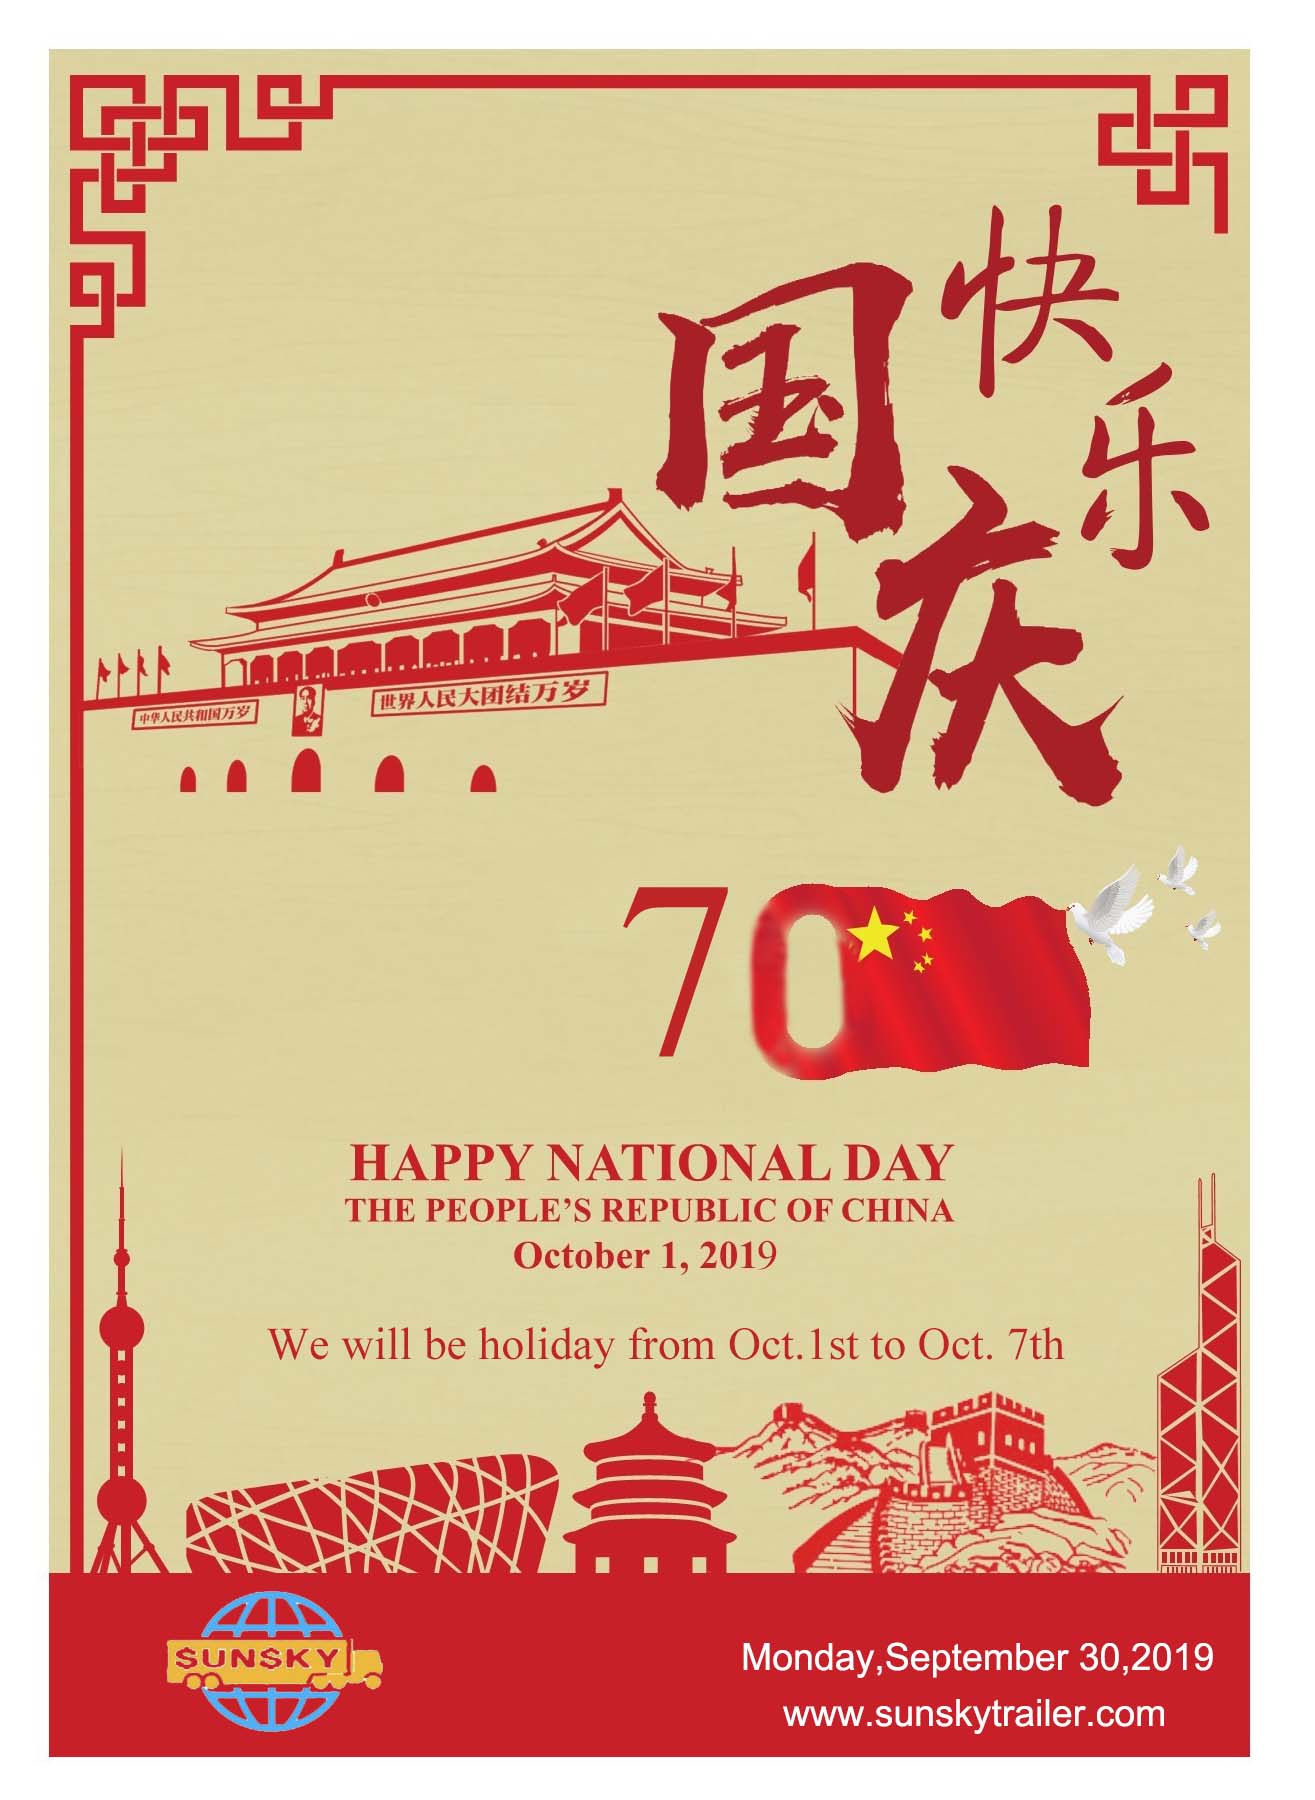 SUNSKY trailer and truck: Happy China National Day 70 Years